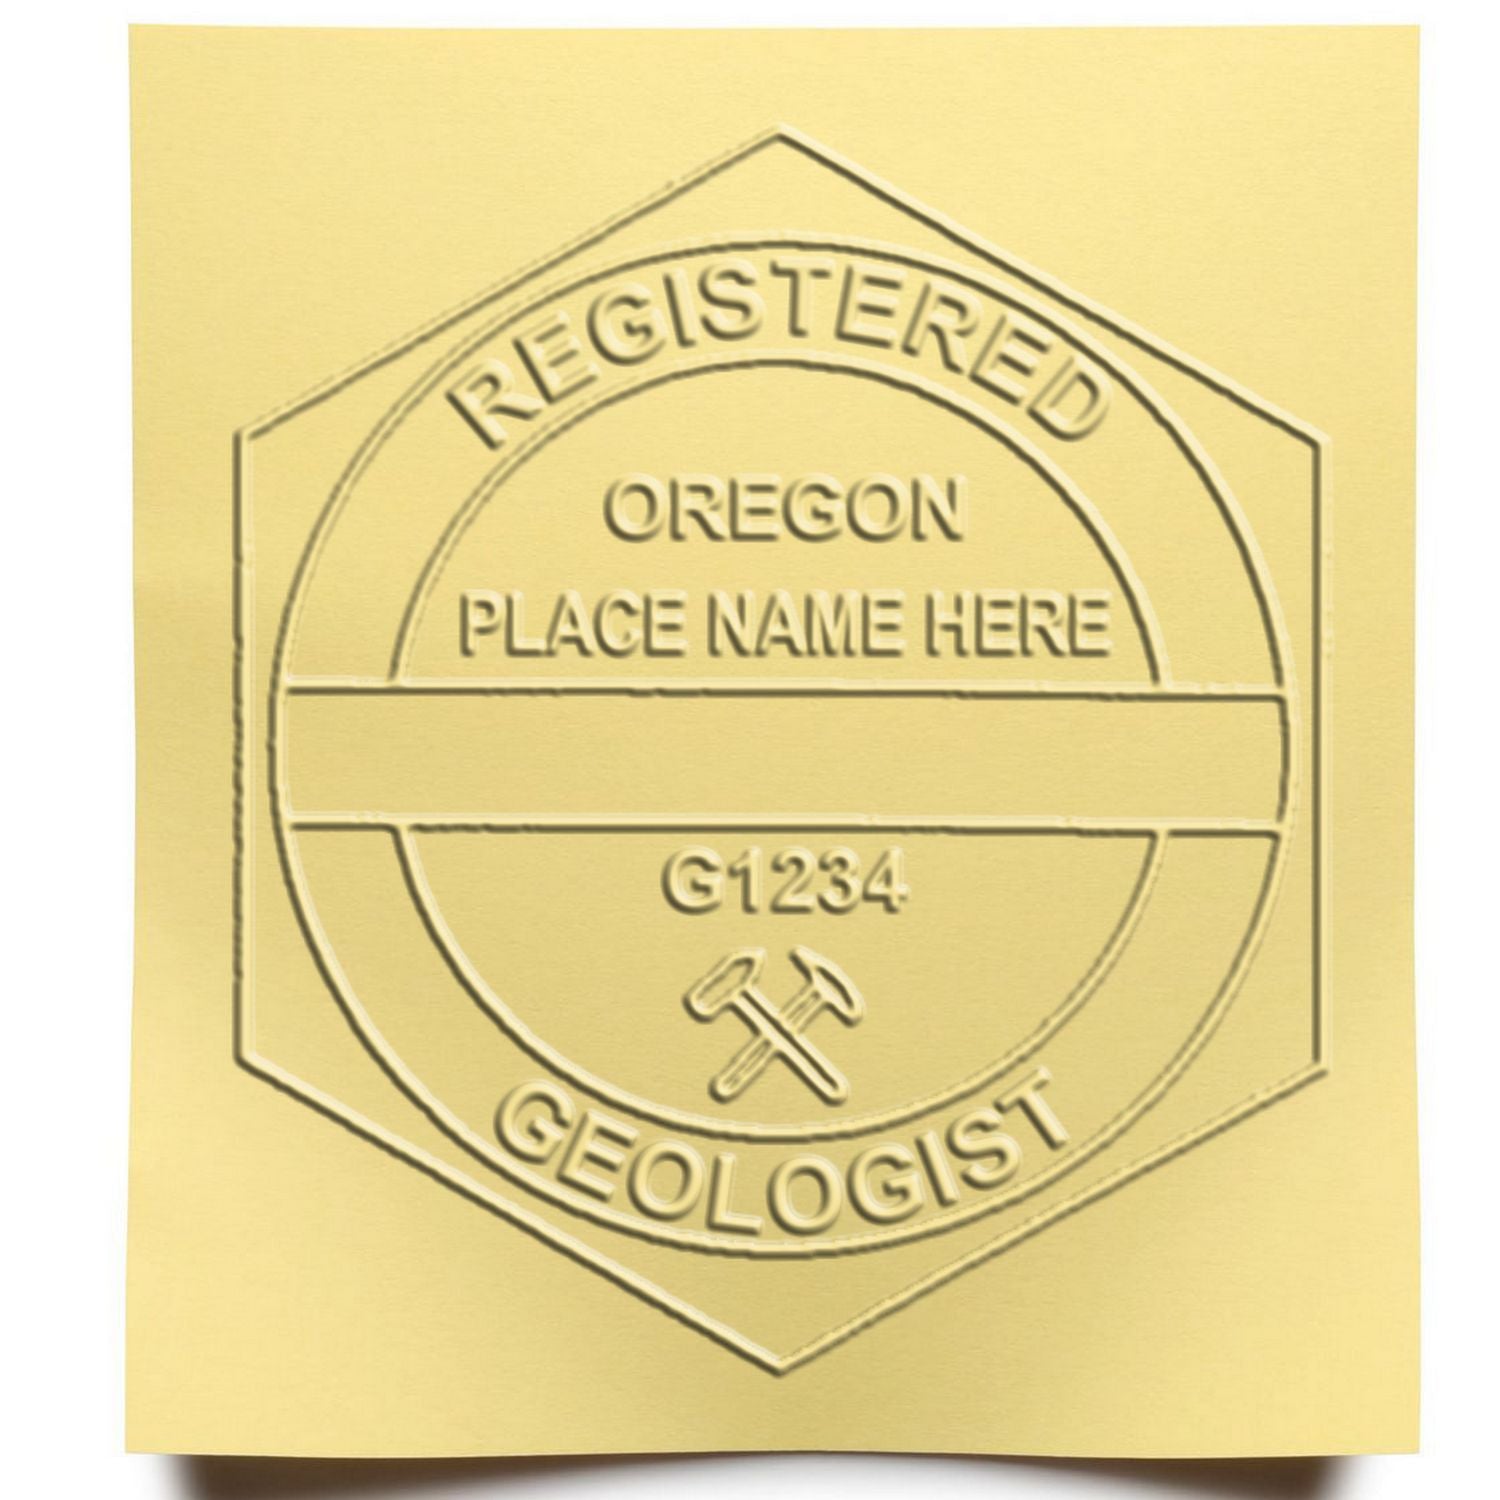 The main image for the Heavy Duty Cast Iron Oregon Geologist Seal Embosser depicting a sample of the imprint and imprint sample